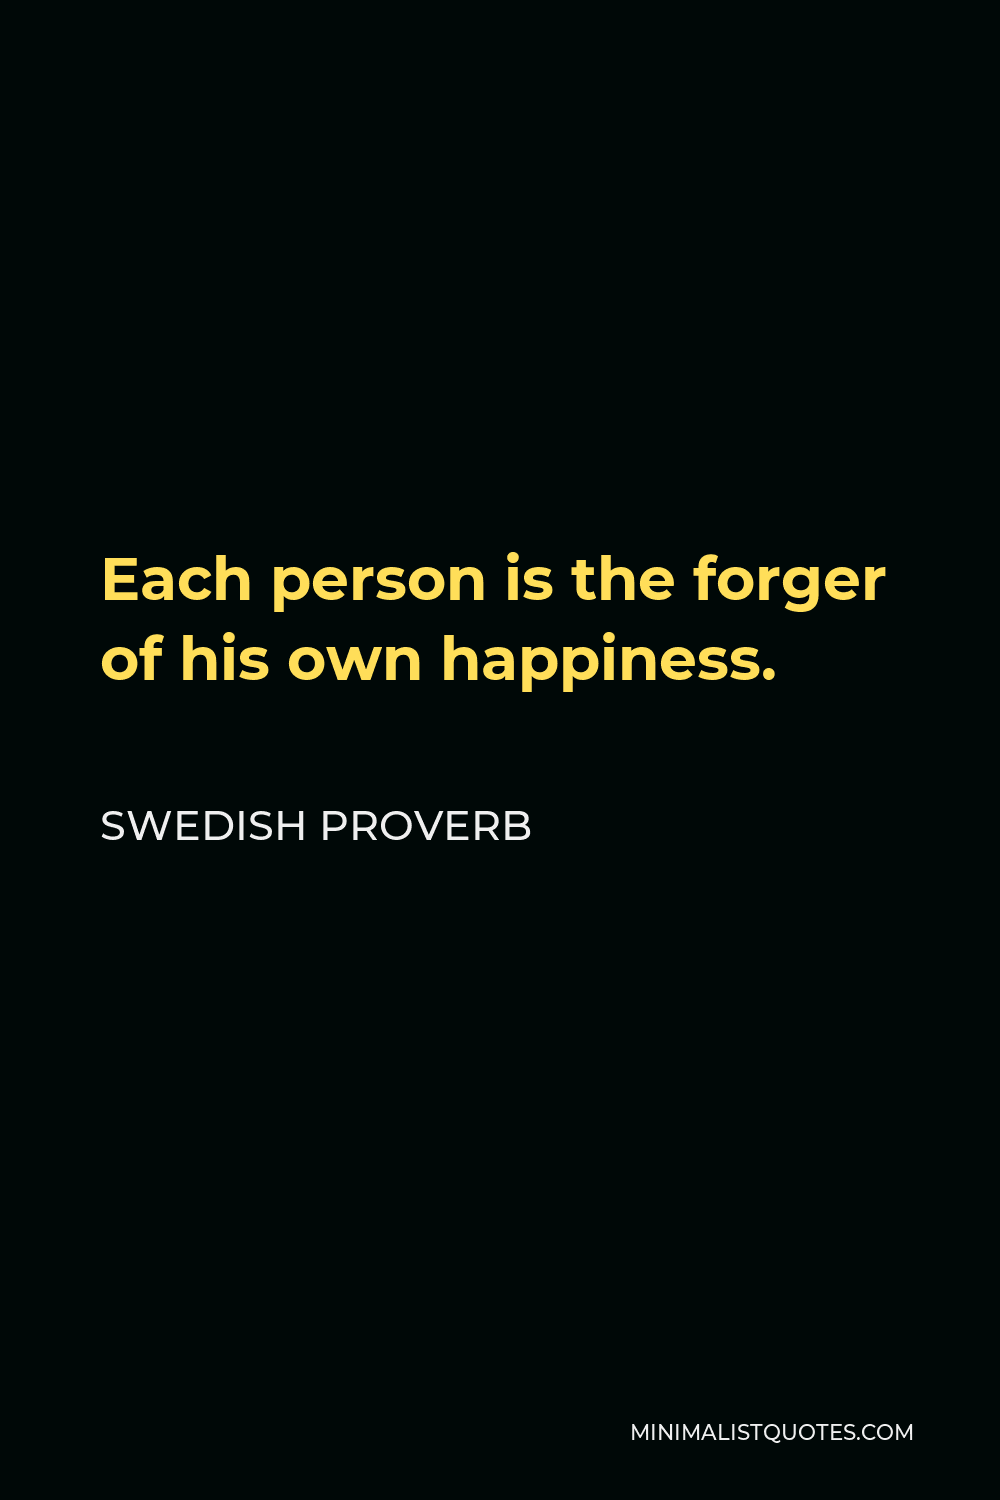 Swedish Proverb Quote - Each person is the forger of his own happiness.